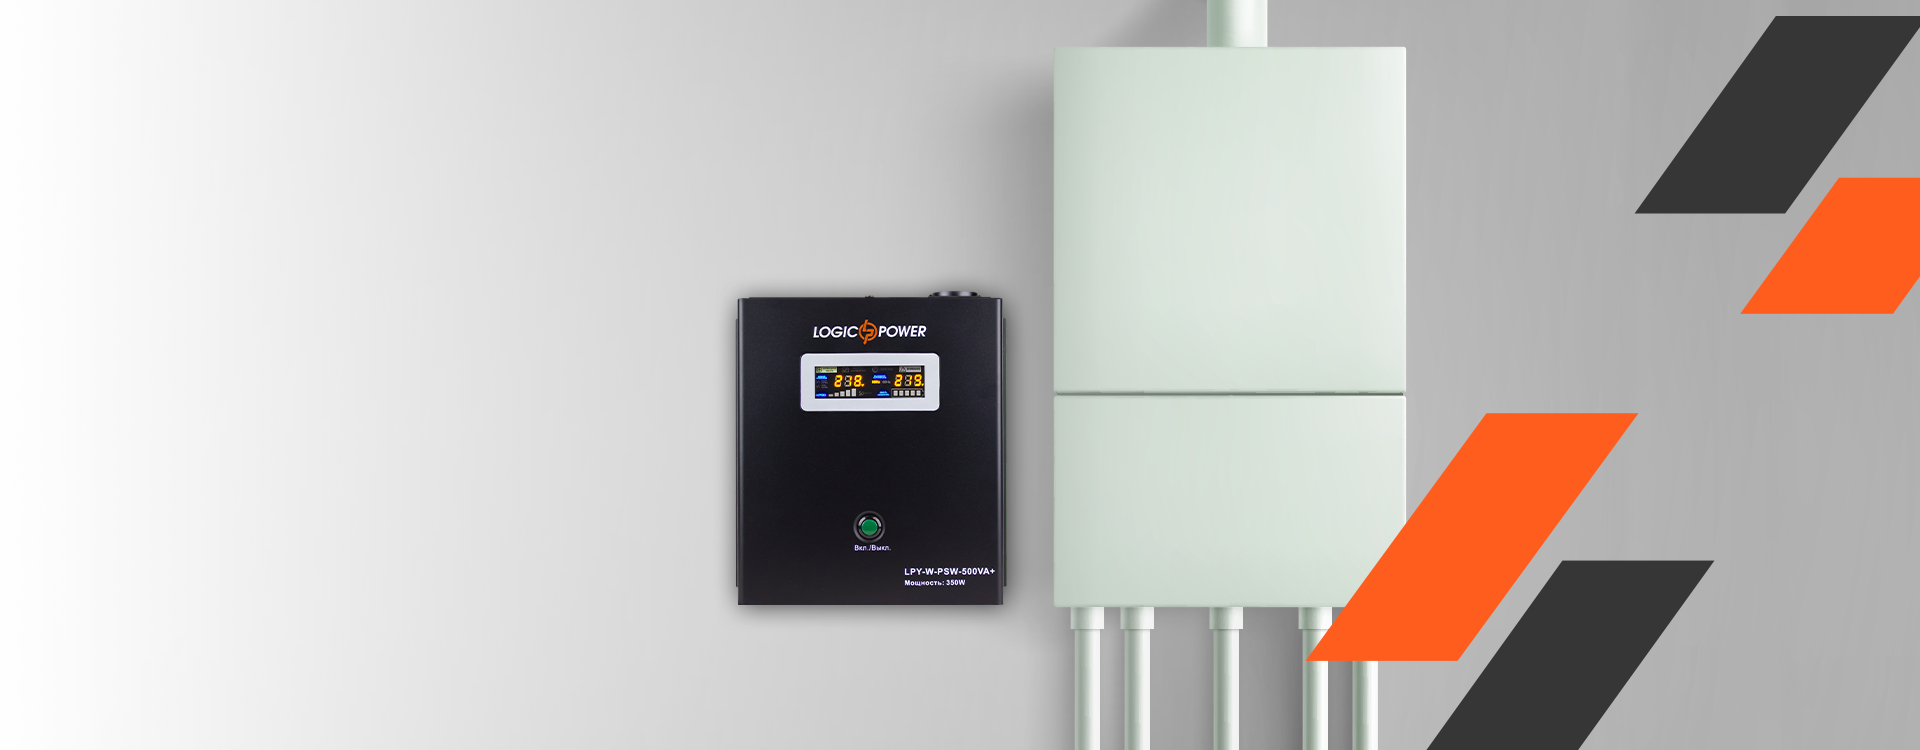 Uninterruptible power supplies for heating boilers TOP user questions